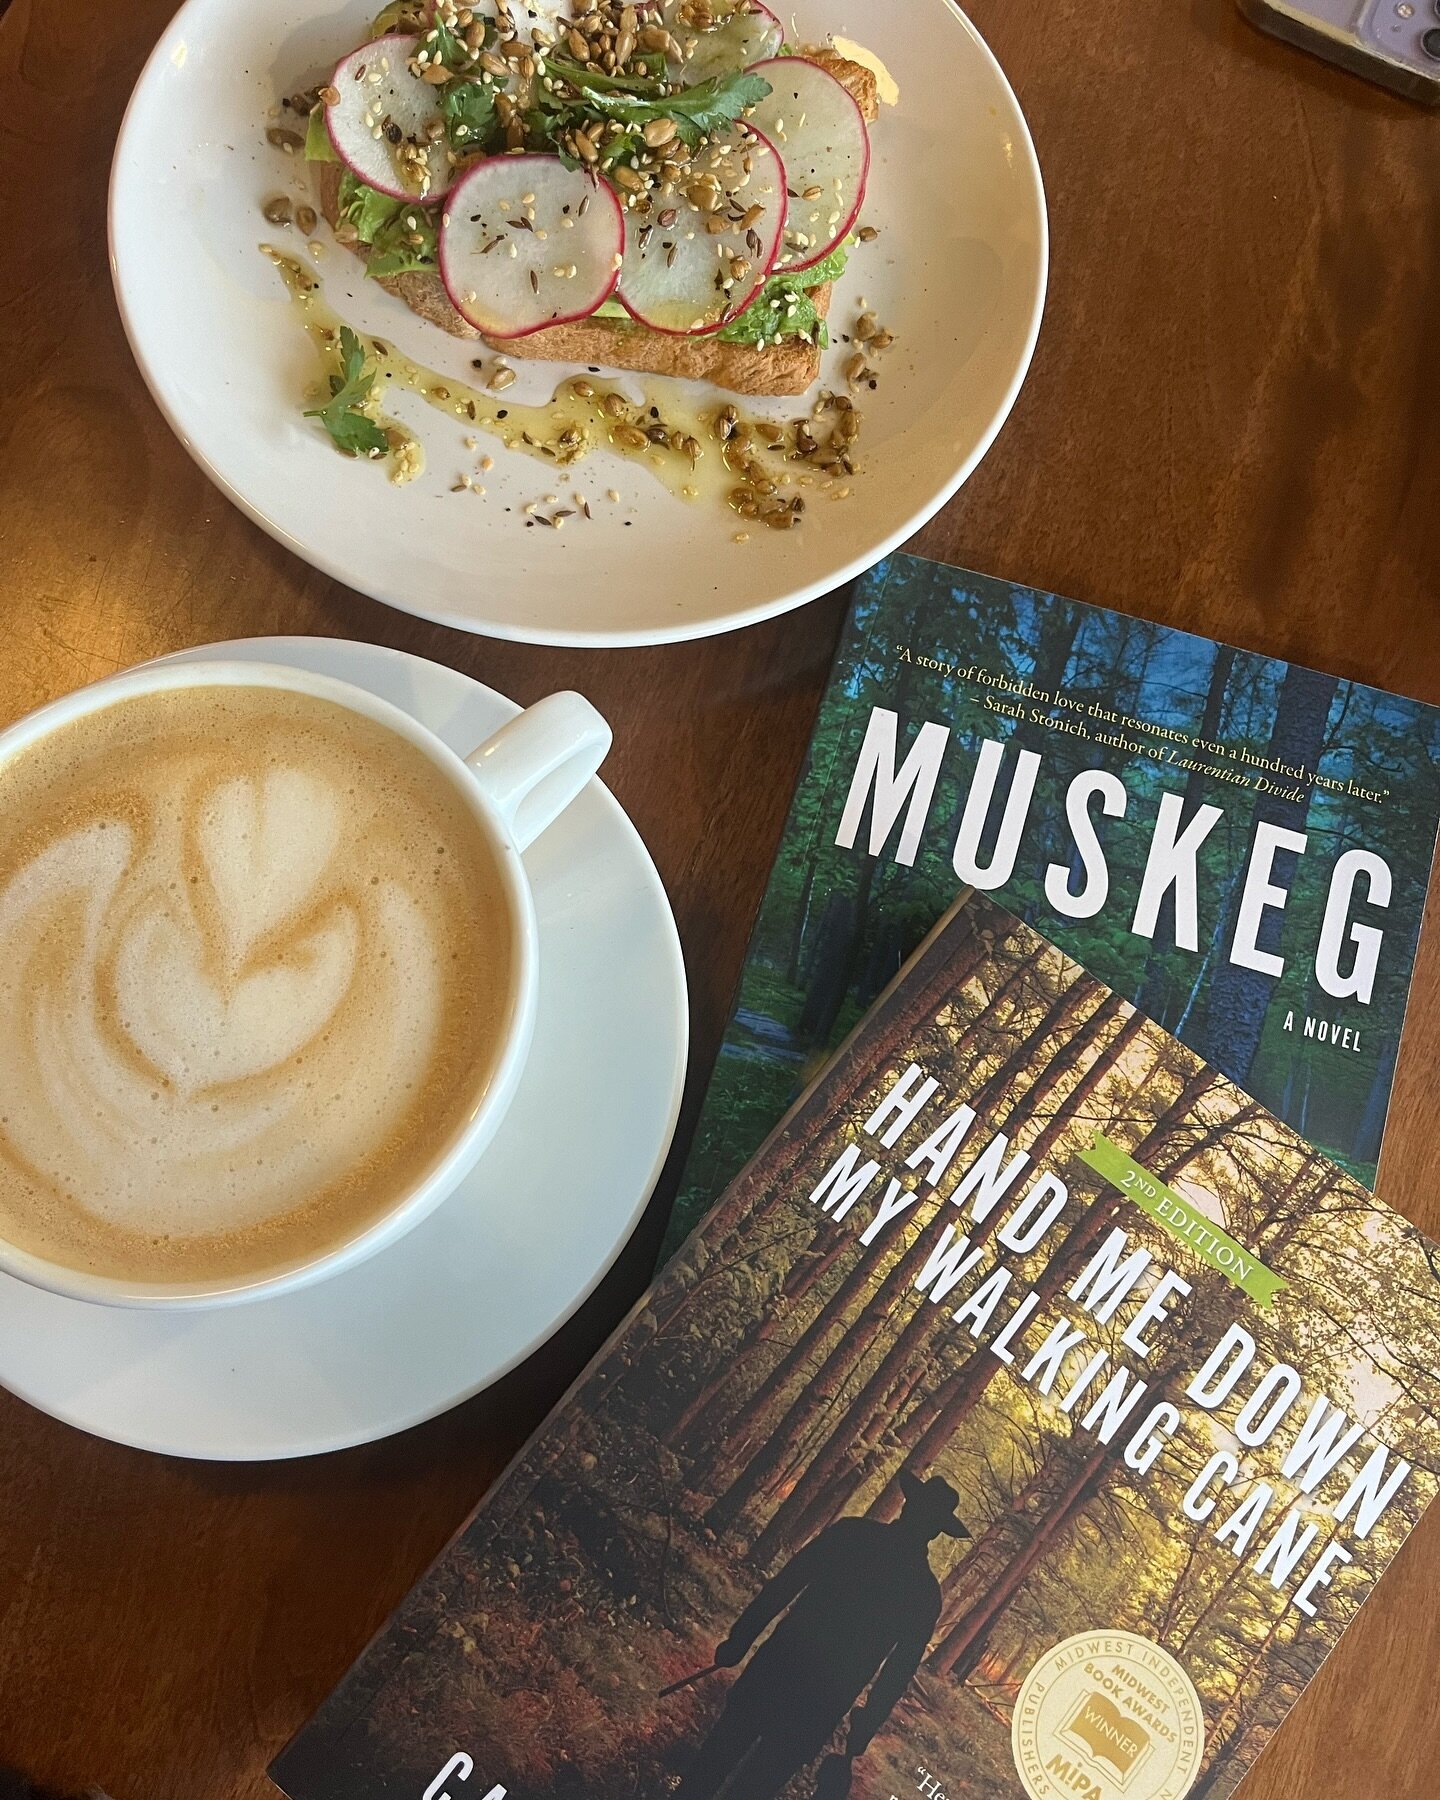 It&rsquo;s a moody, foggy day&hellip;time for exploring the Borderland and the Bog. Have a warm cuppa and tuck in! 

Buy one for you and one for a loved one at 
Buy at independent bookstores:

1. SubText @subtextbooks in downtown Saint Paul
1.  Eat M